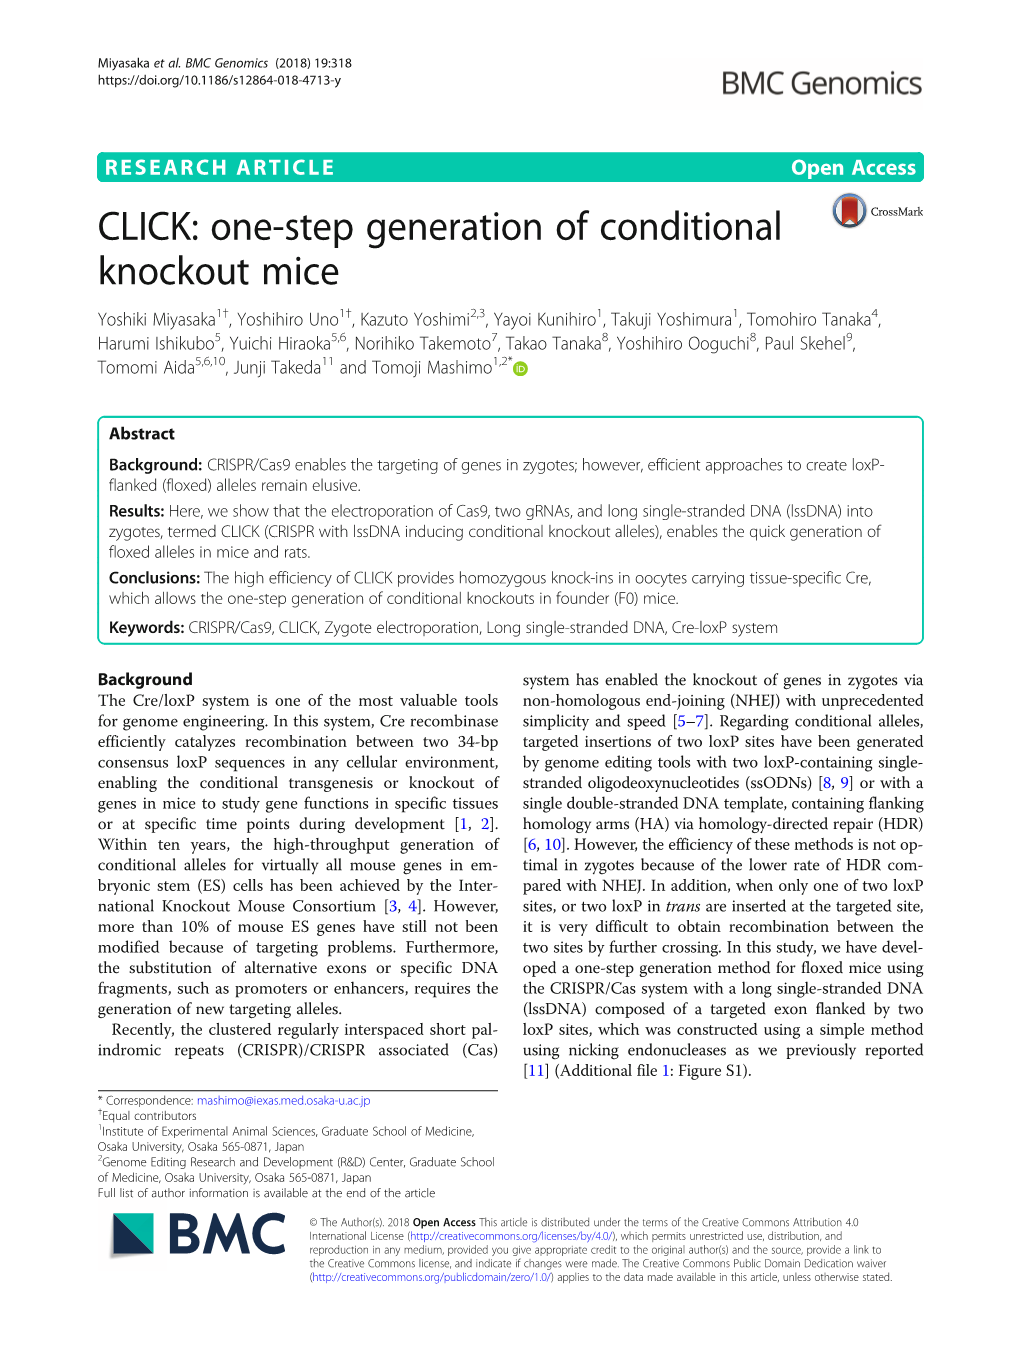 CLICK: One-Step Generation of Conditional Knockout Mice